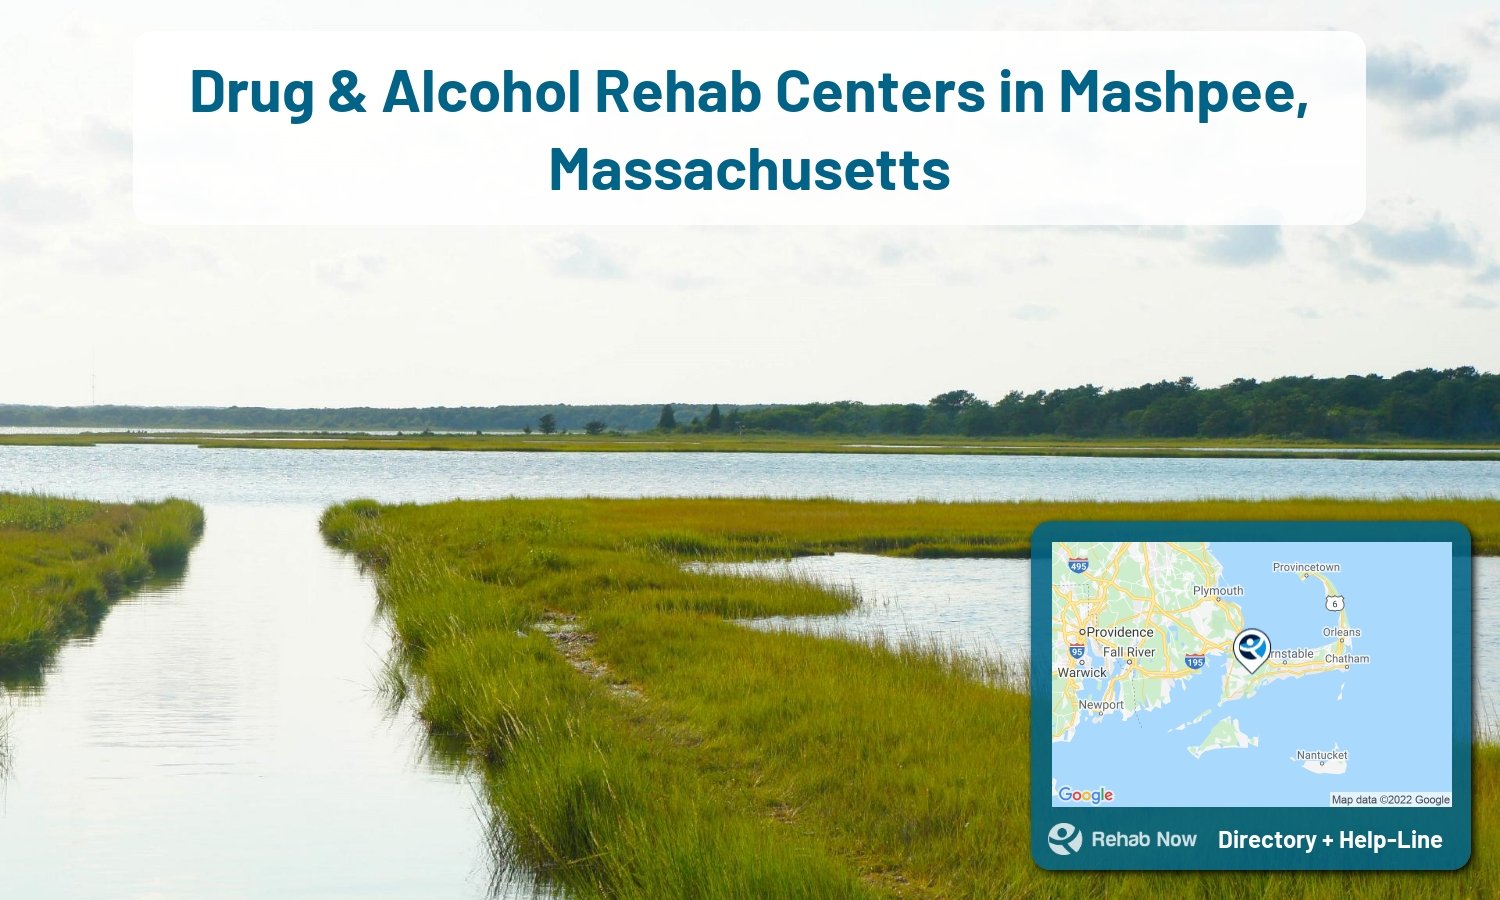 Mashpee, MA Treatment Centers. Find drug rehab in Mashpee, Massachusetts, or detox and treatment programs. Get the right help now!